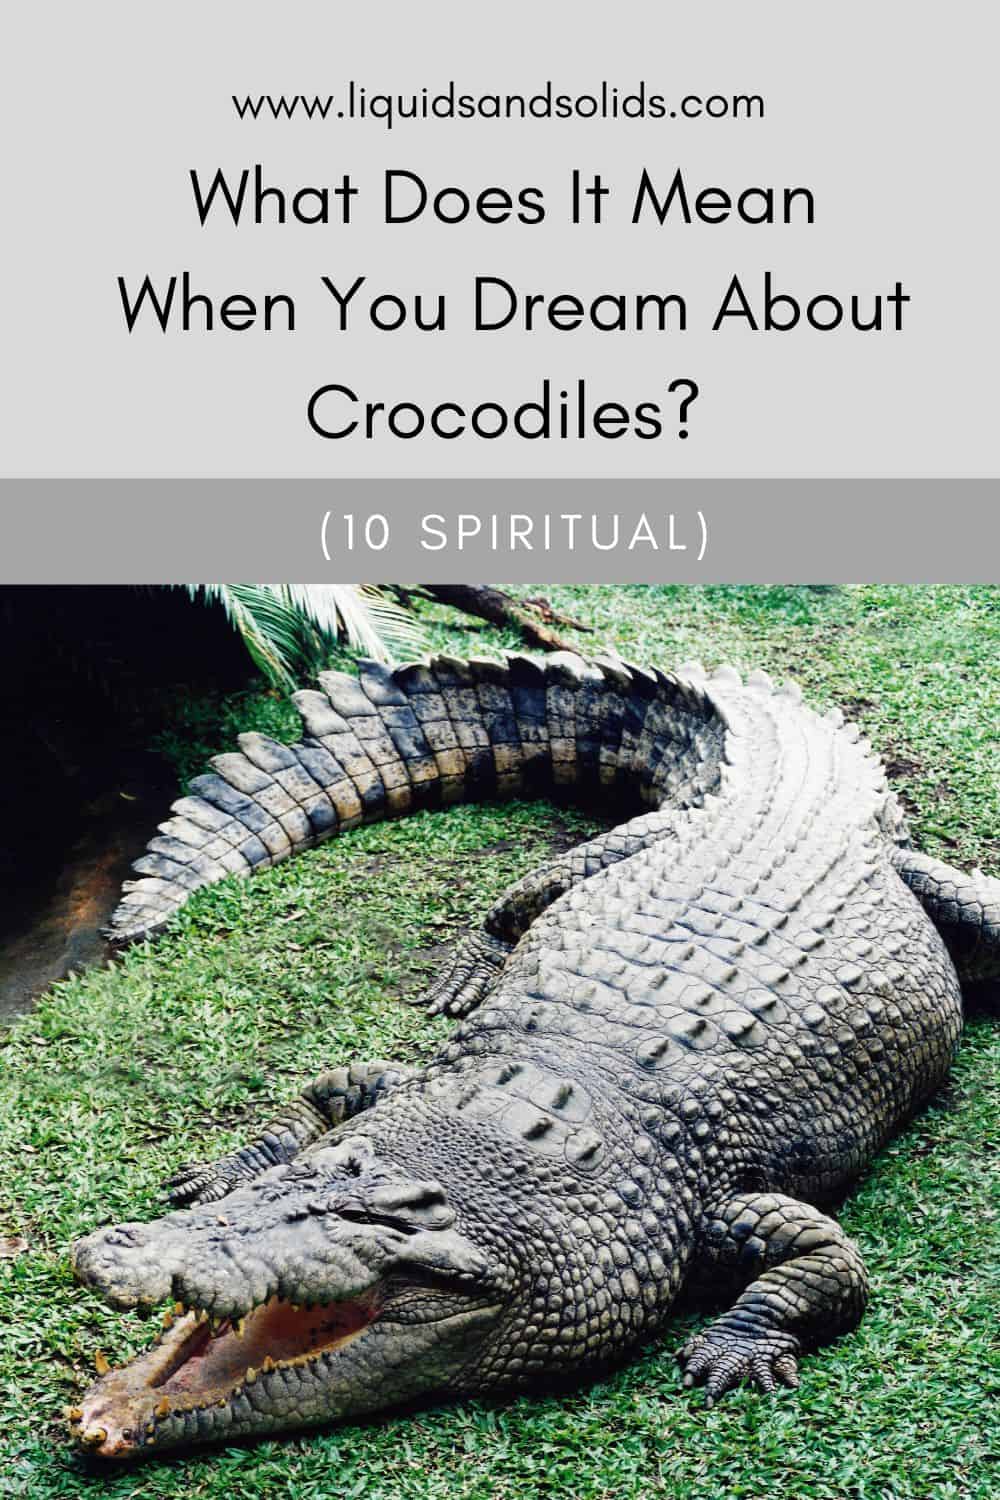 What Does It Mean When You Dream About Crocodiles? (10 Spiritual)